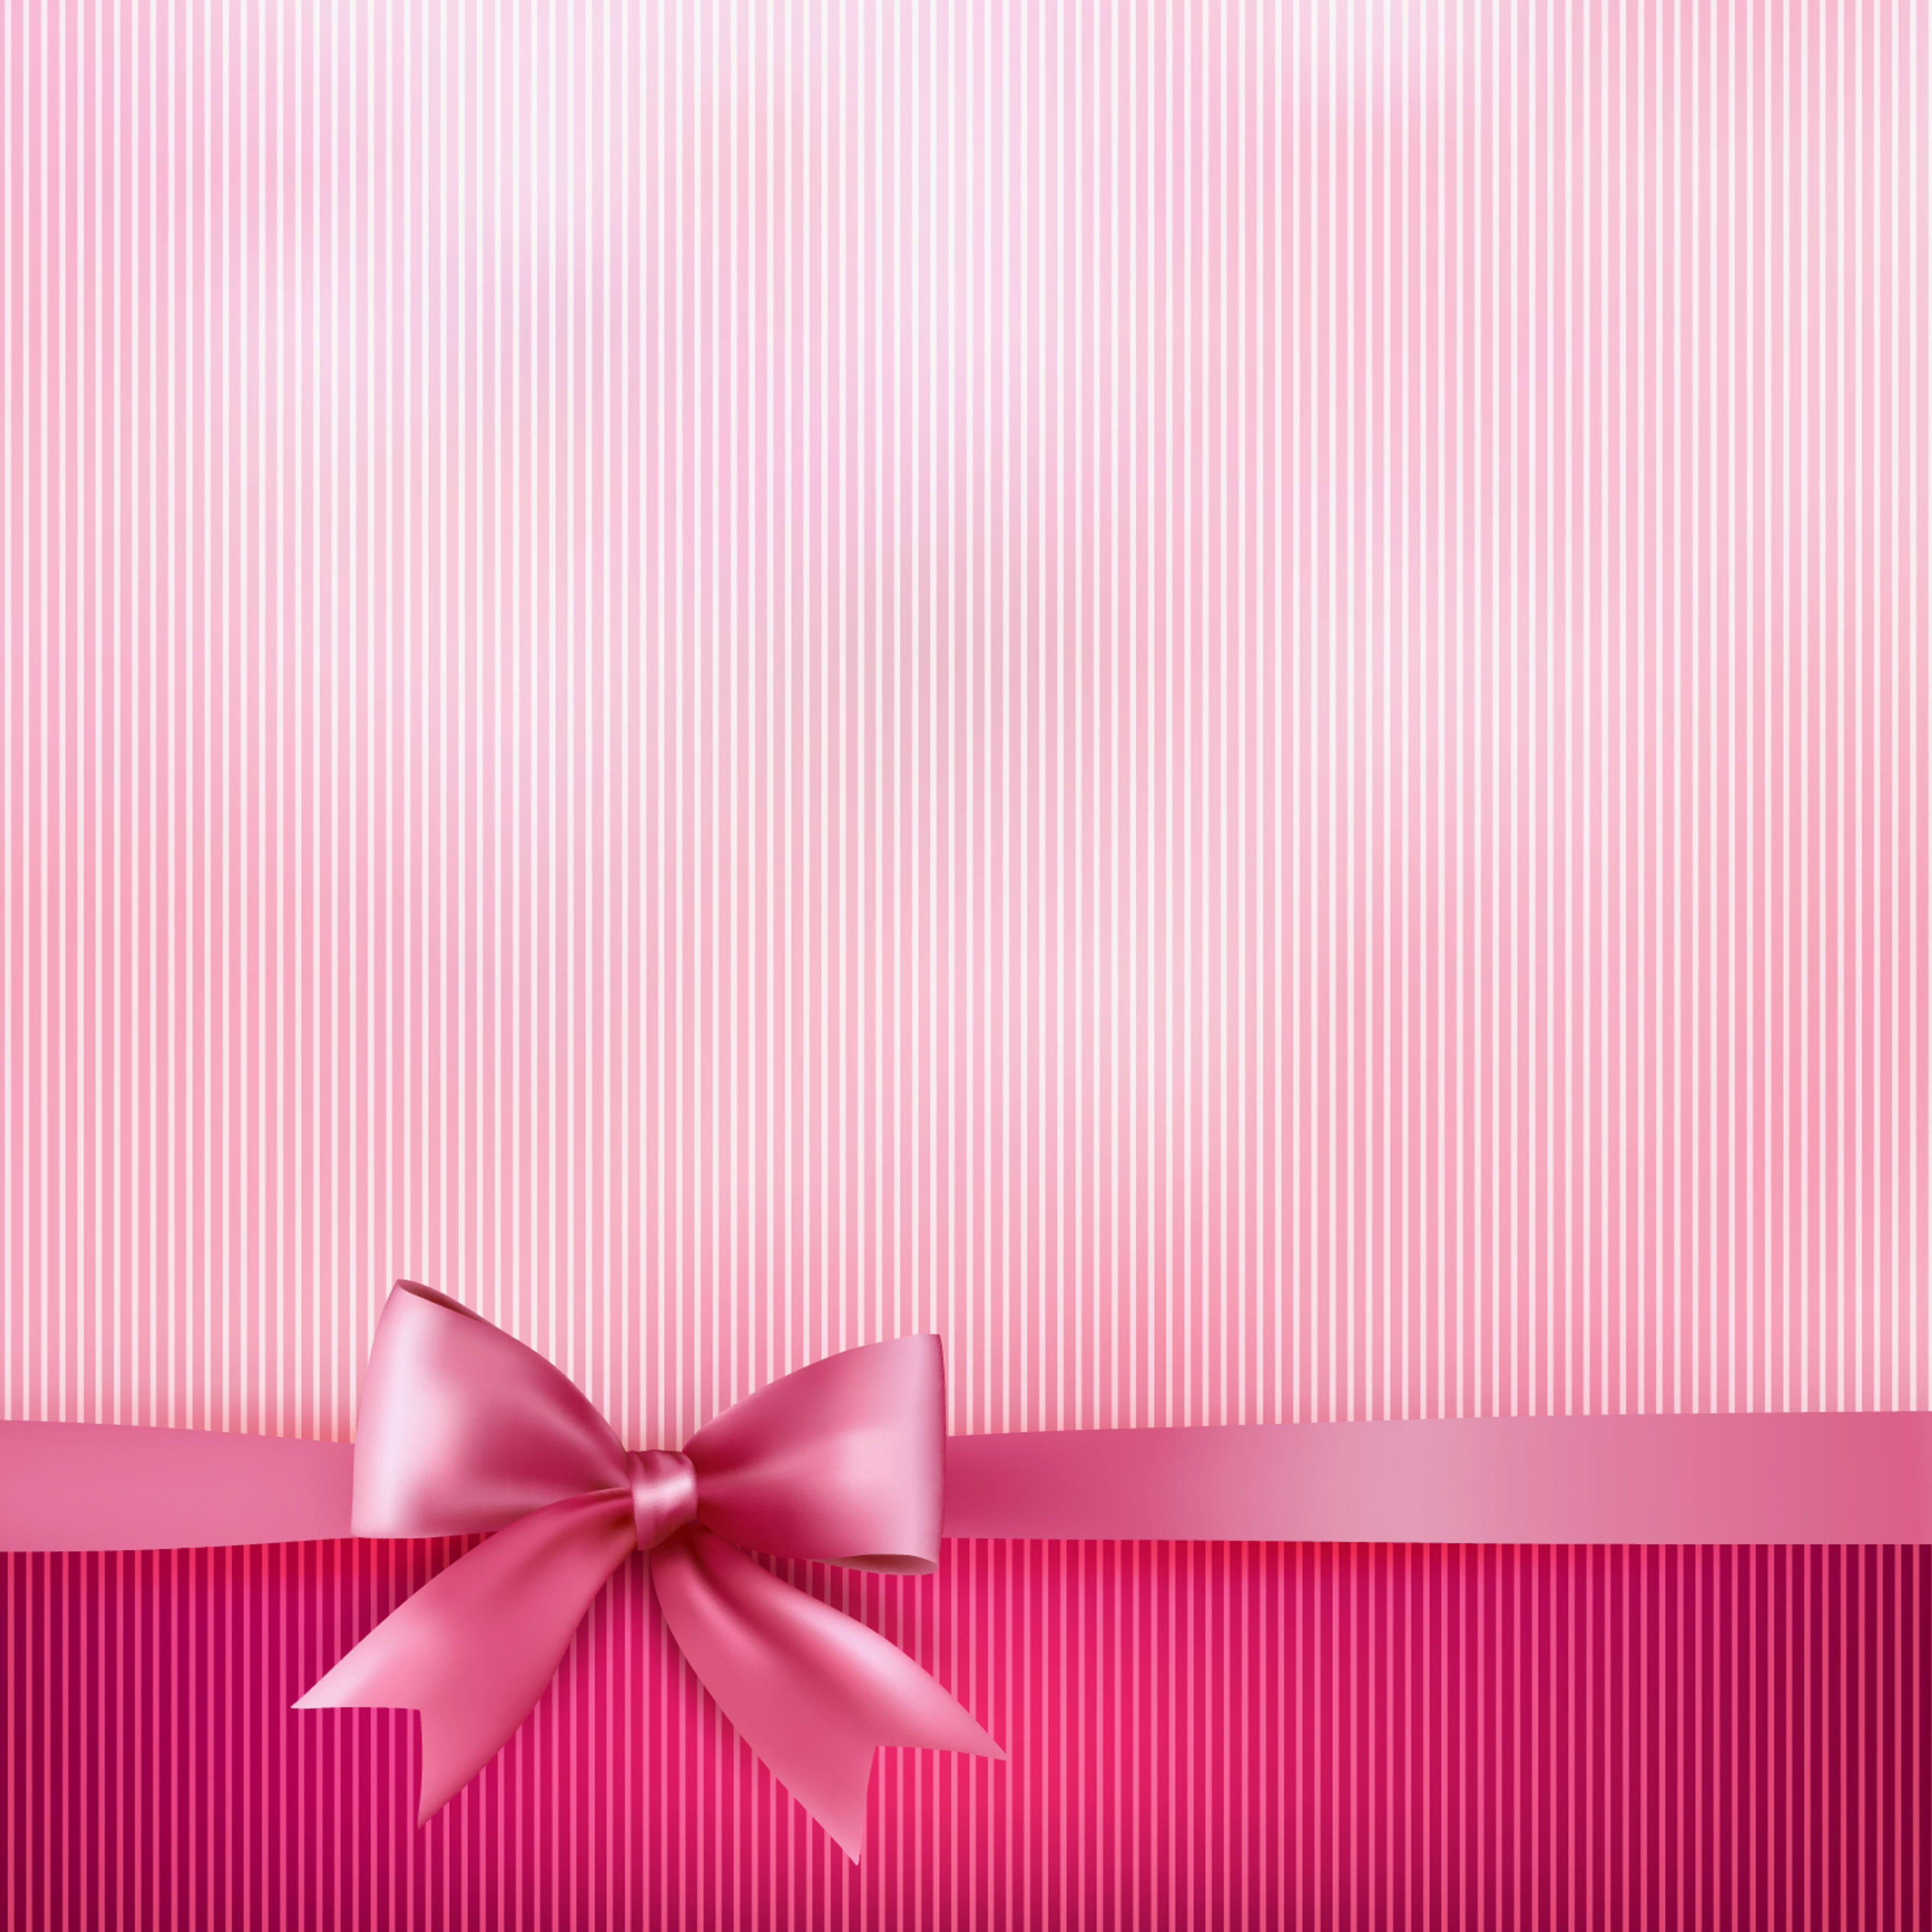 Pink Striped Background with Bow​-Quality Image and Transparent PNG Free Clipart